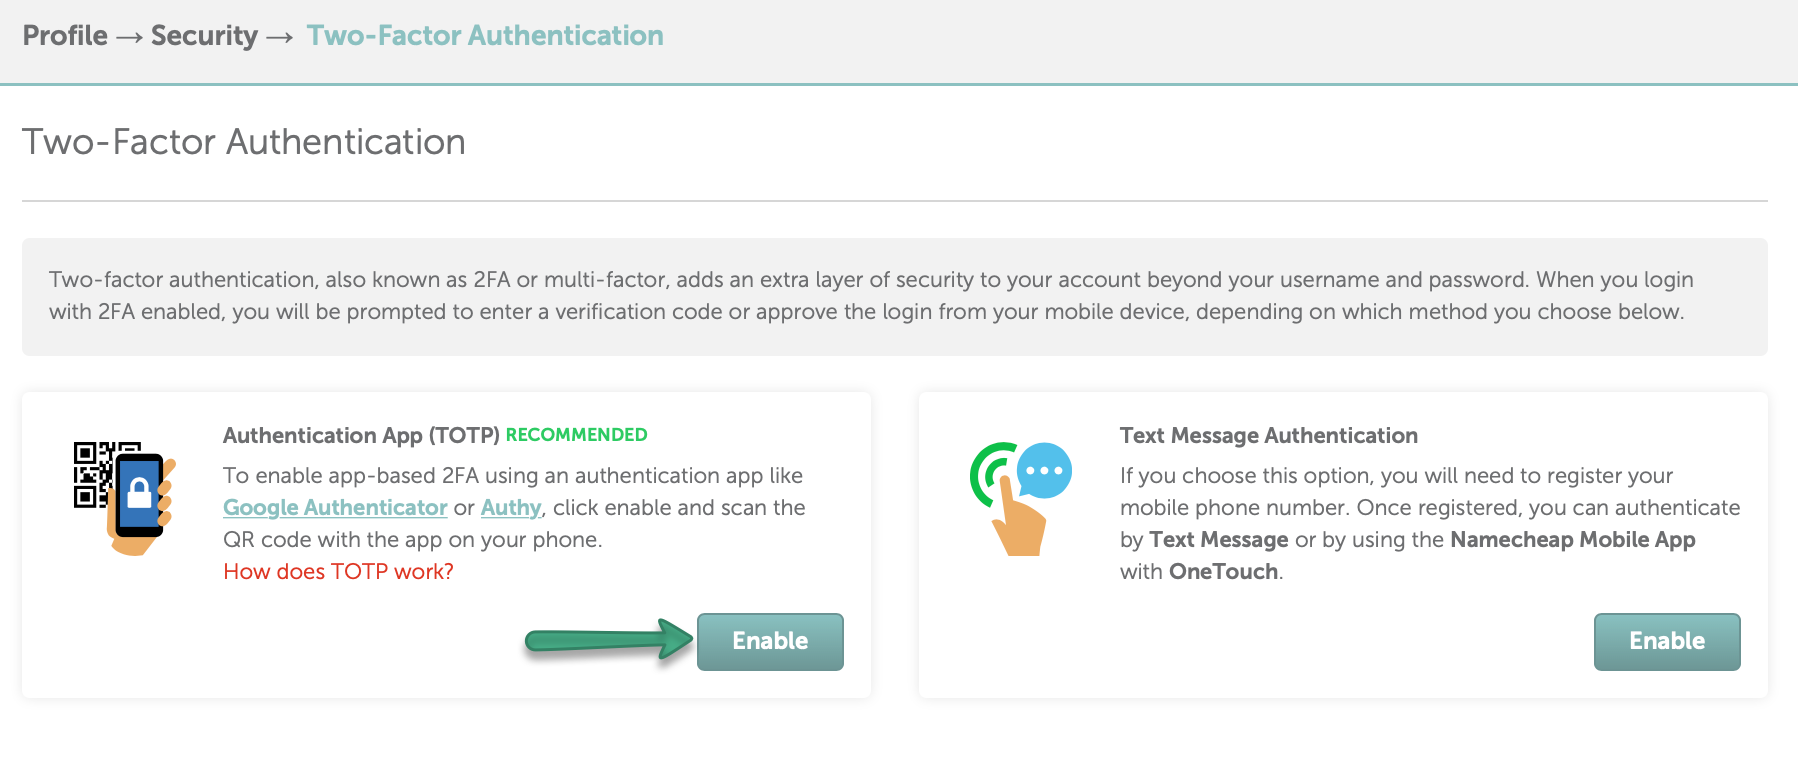 NameCheap launches new TOTP 2FA &#8211; How to Enable It